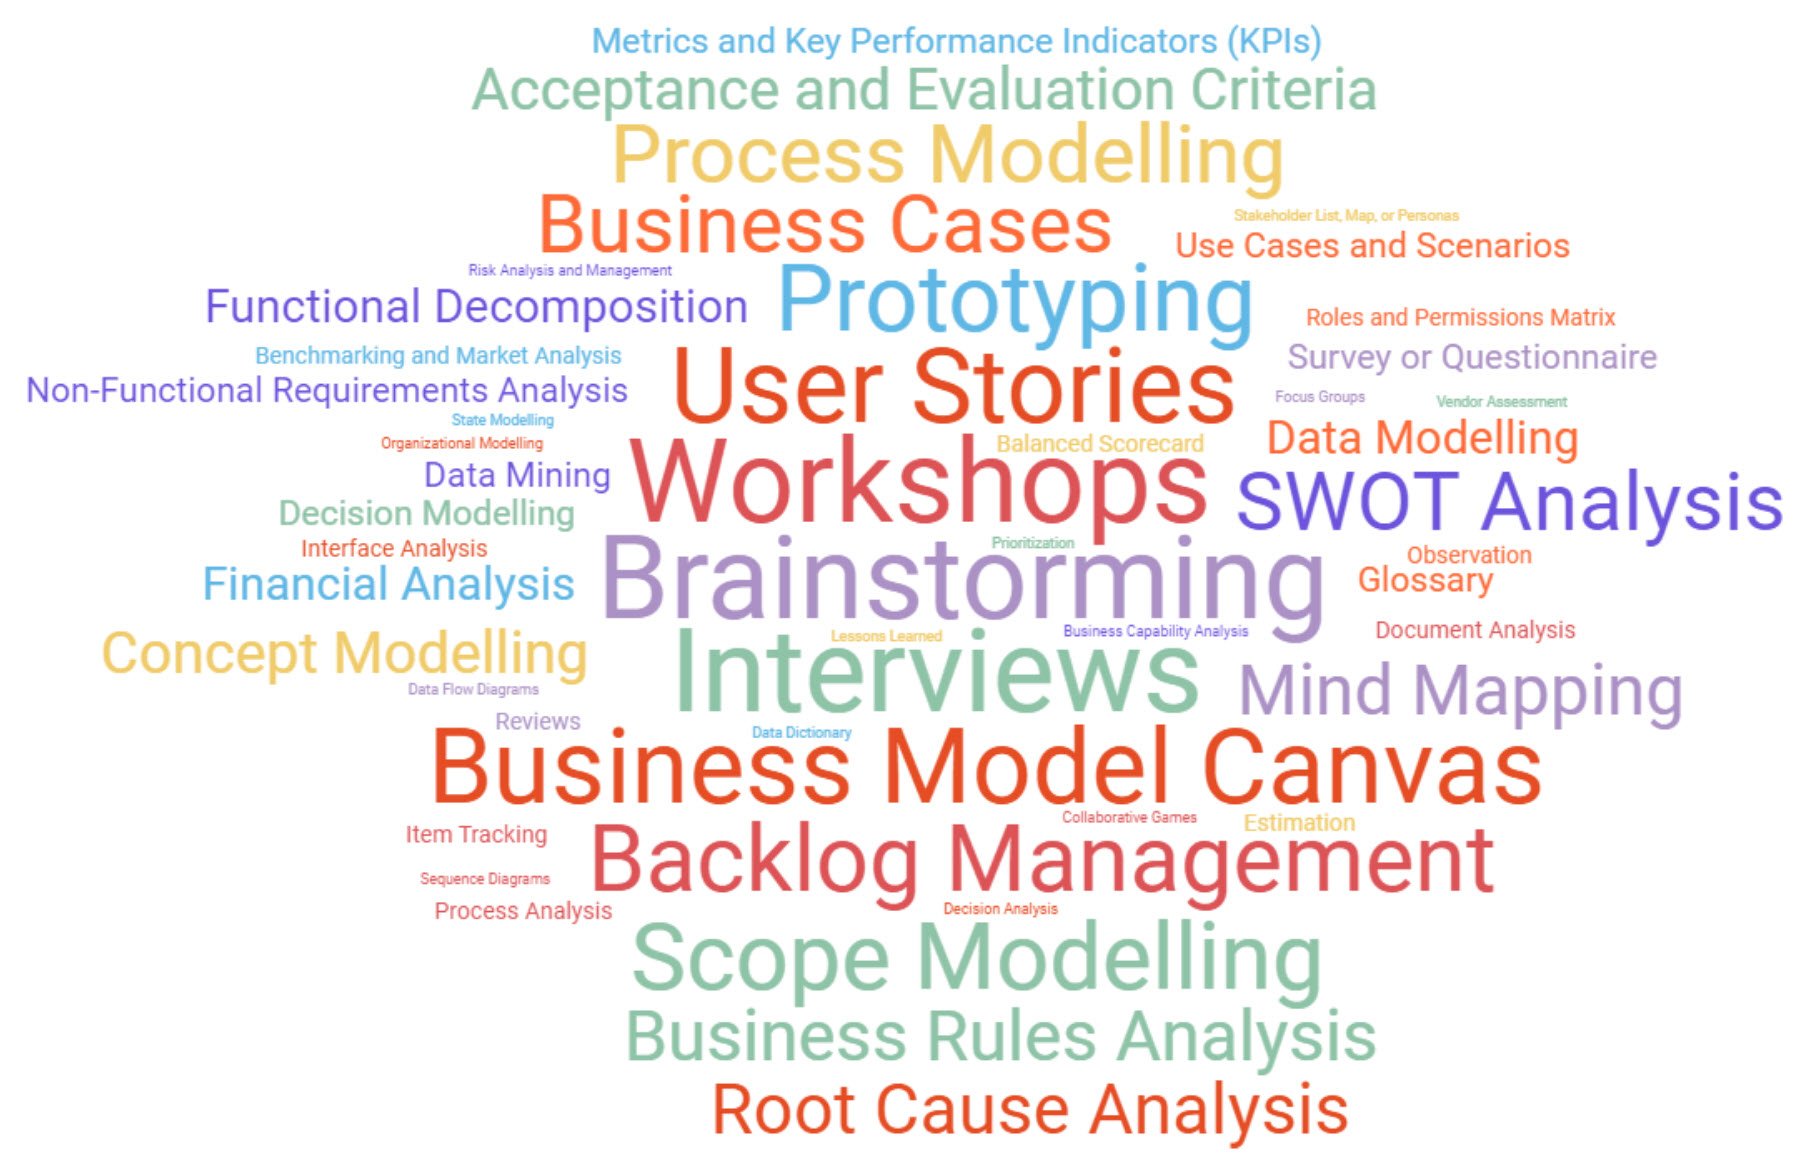 Business Analysis Techniques word cloud.jpg